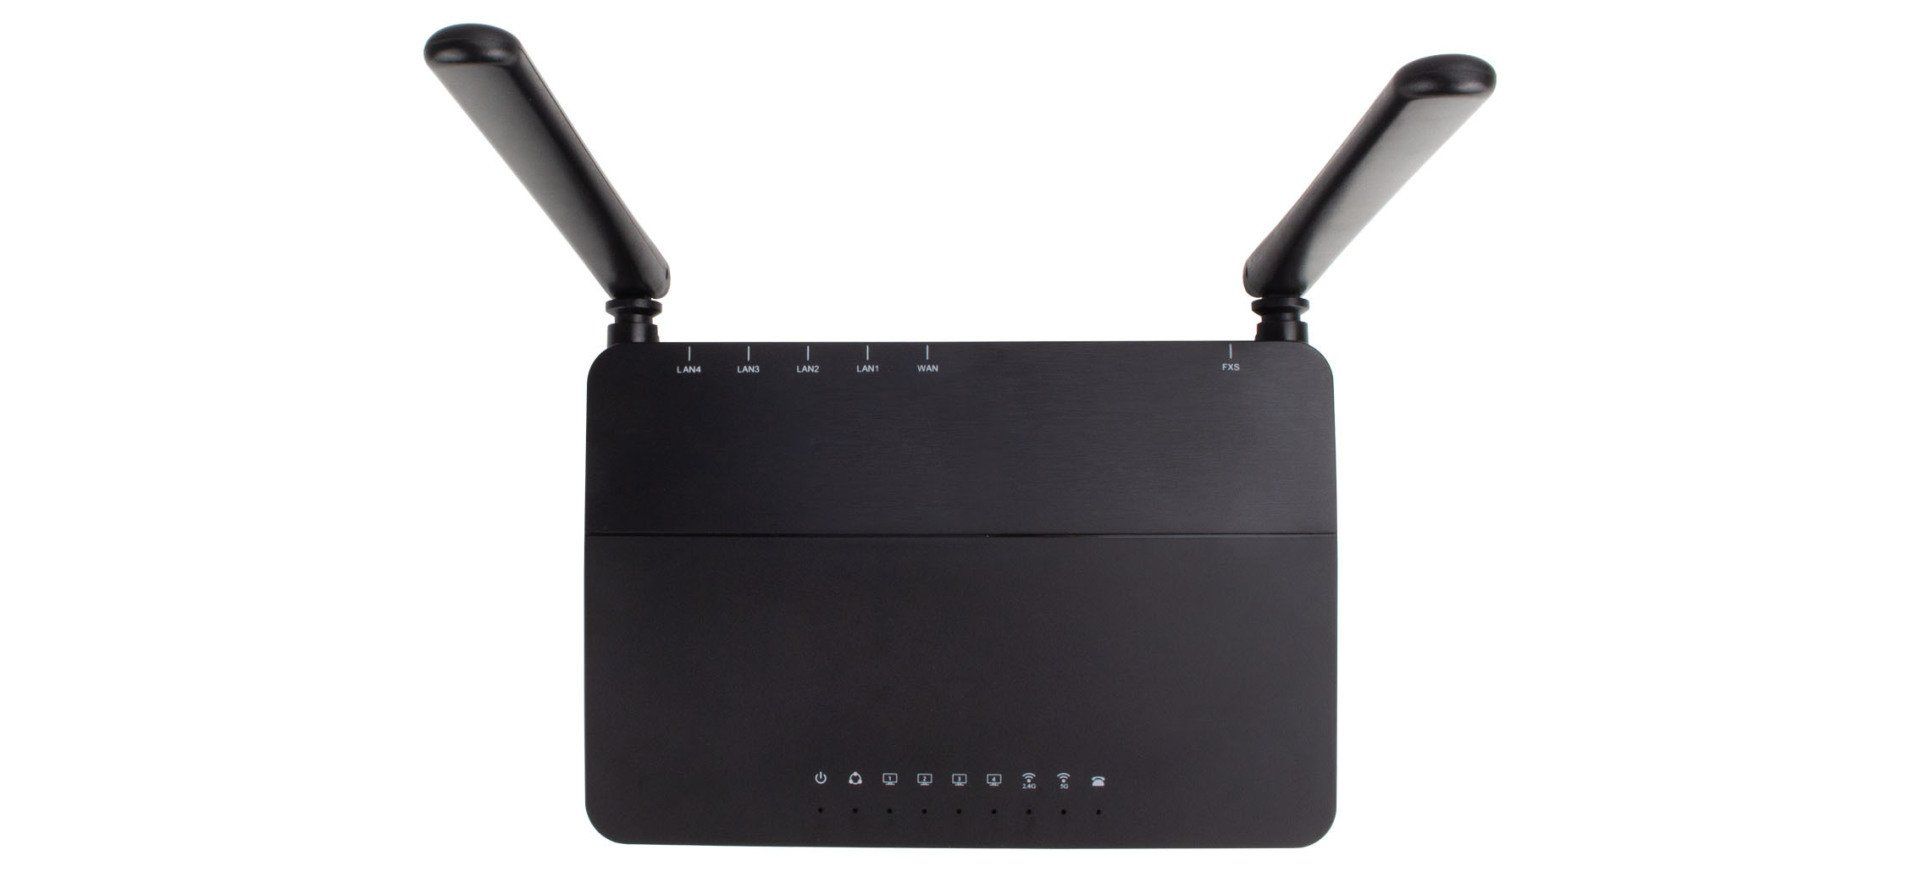 AC1300MS Wireless AC VoIP Router